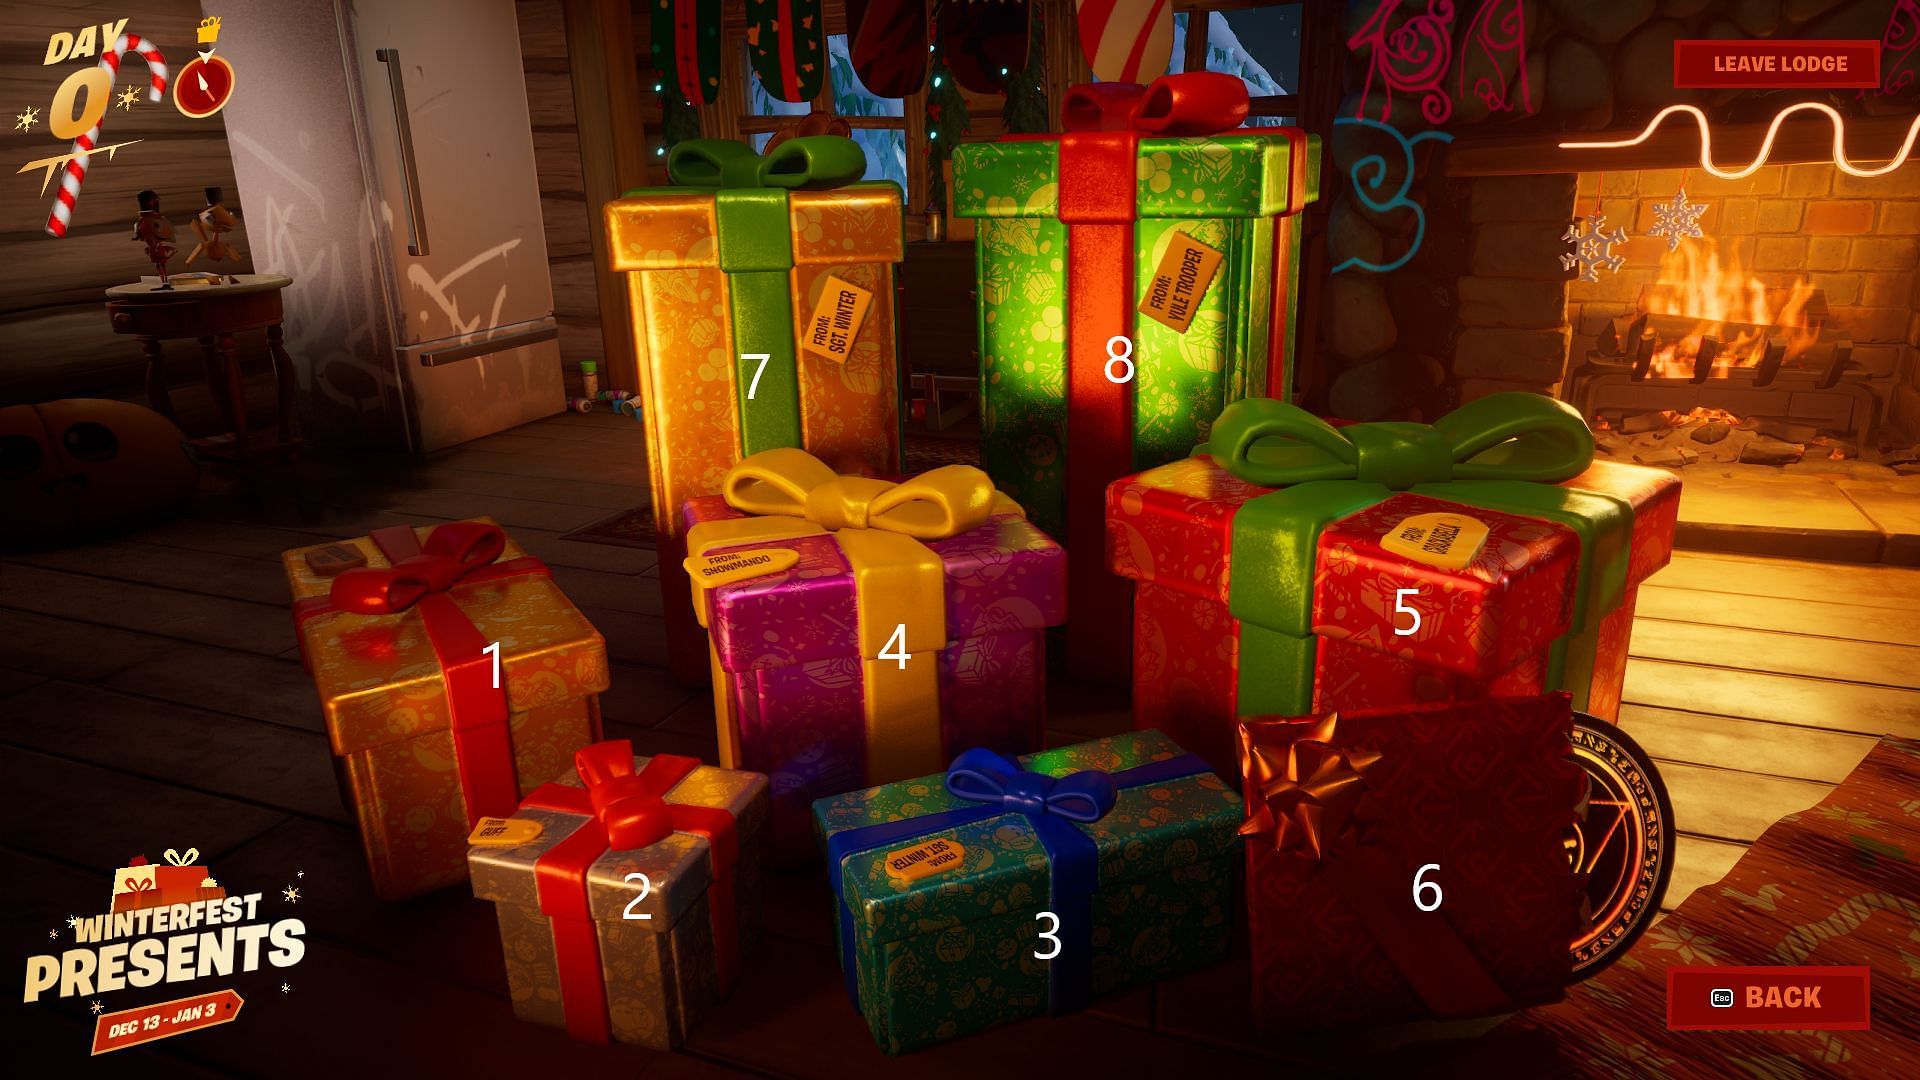 Eight presents are located on the left-hand side of the room (Image via Epic Games)